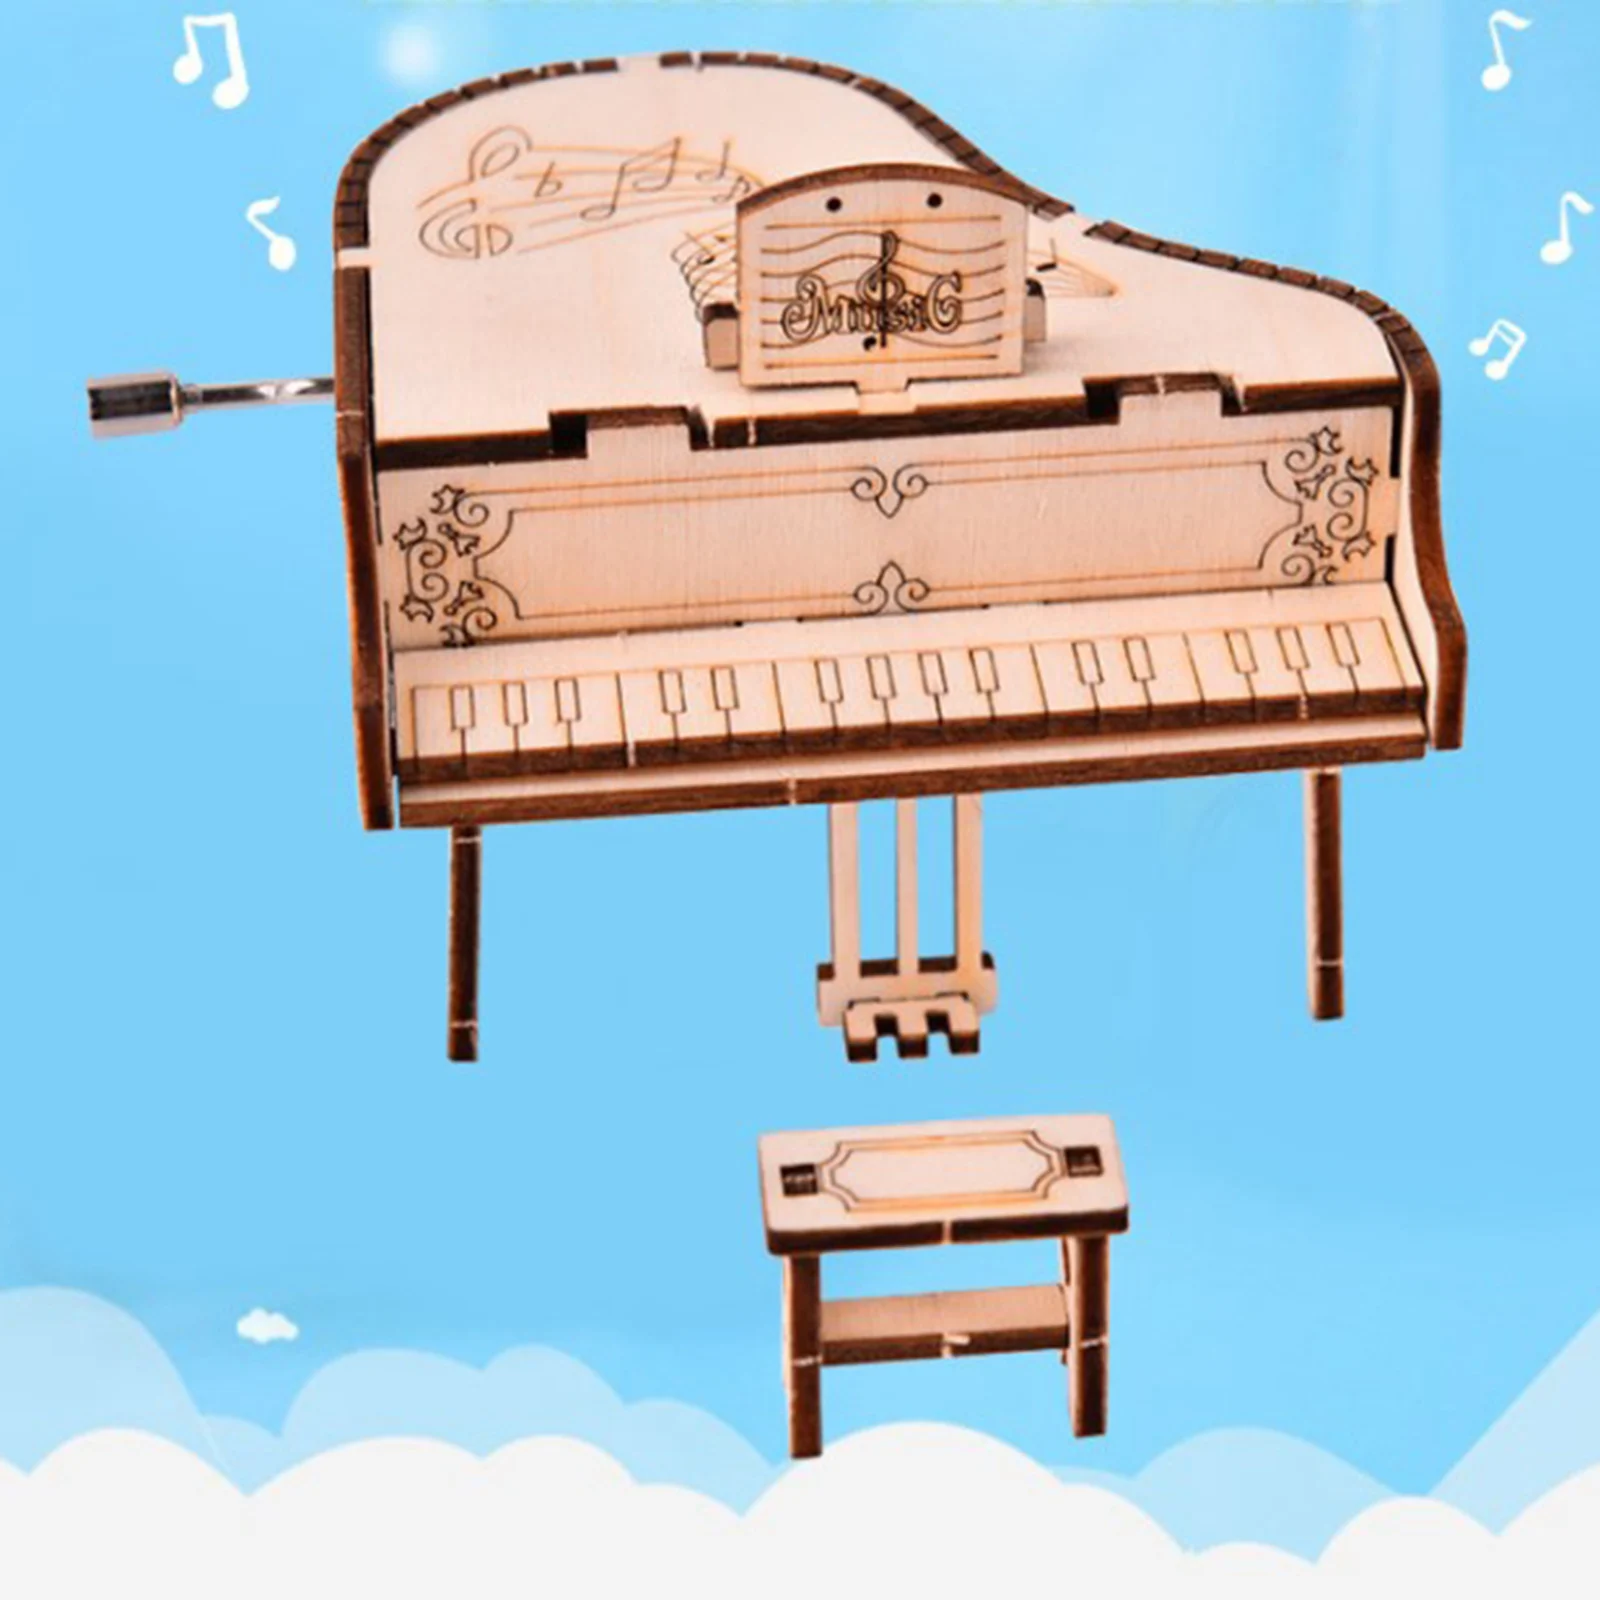 DIY Music Box, Grand Piano 3D Wooden Puzzle Model Kit, Laser Cut Wood Pieces, Educational Building Model Toy for Adults and Kids